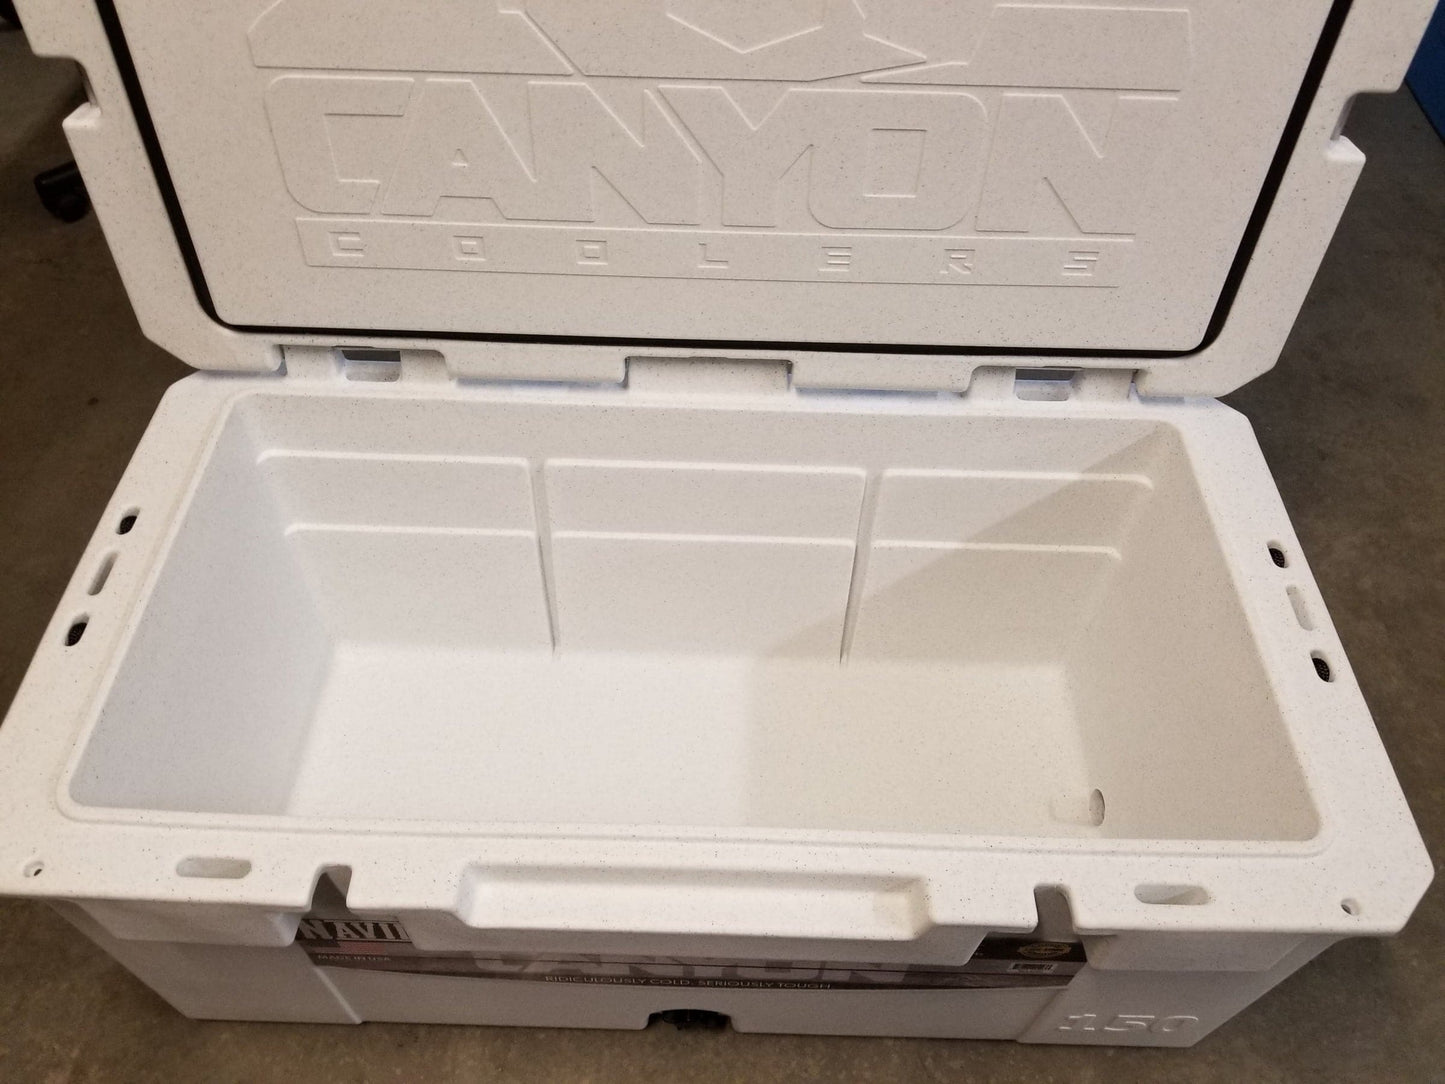 Featuring the Navigator Pro 150 Cooler cooler manufactured by Canyon shown here from a third angle.